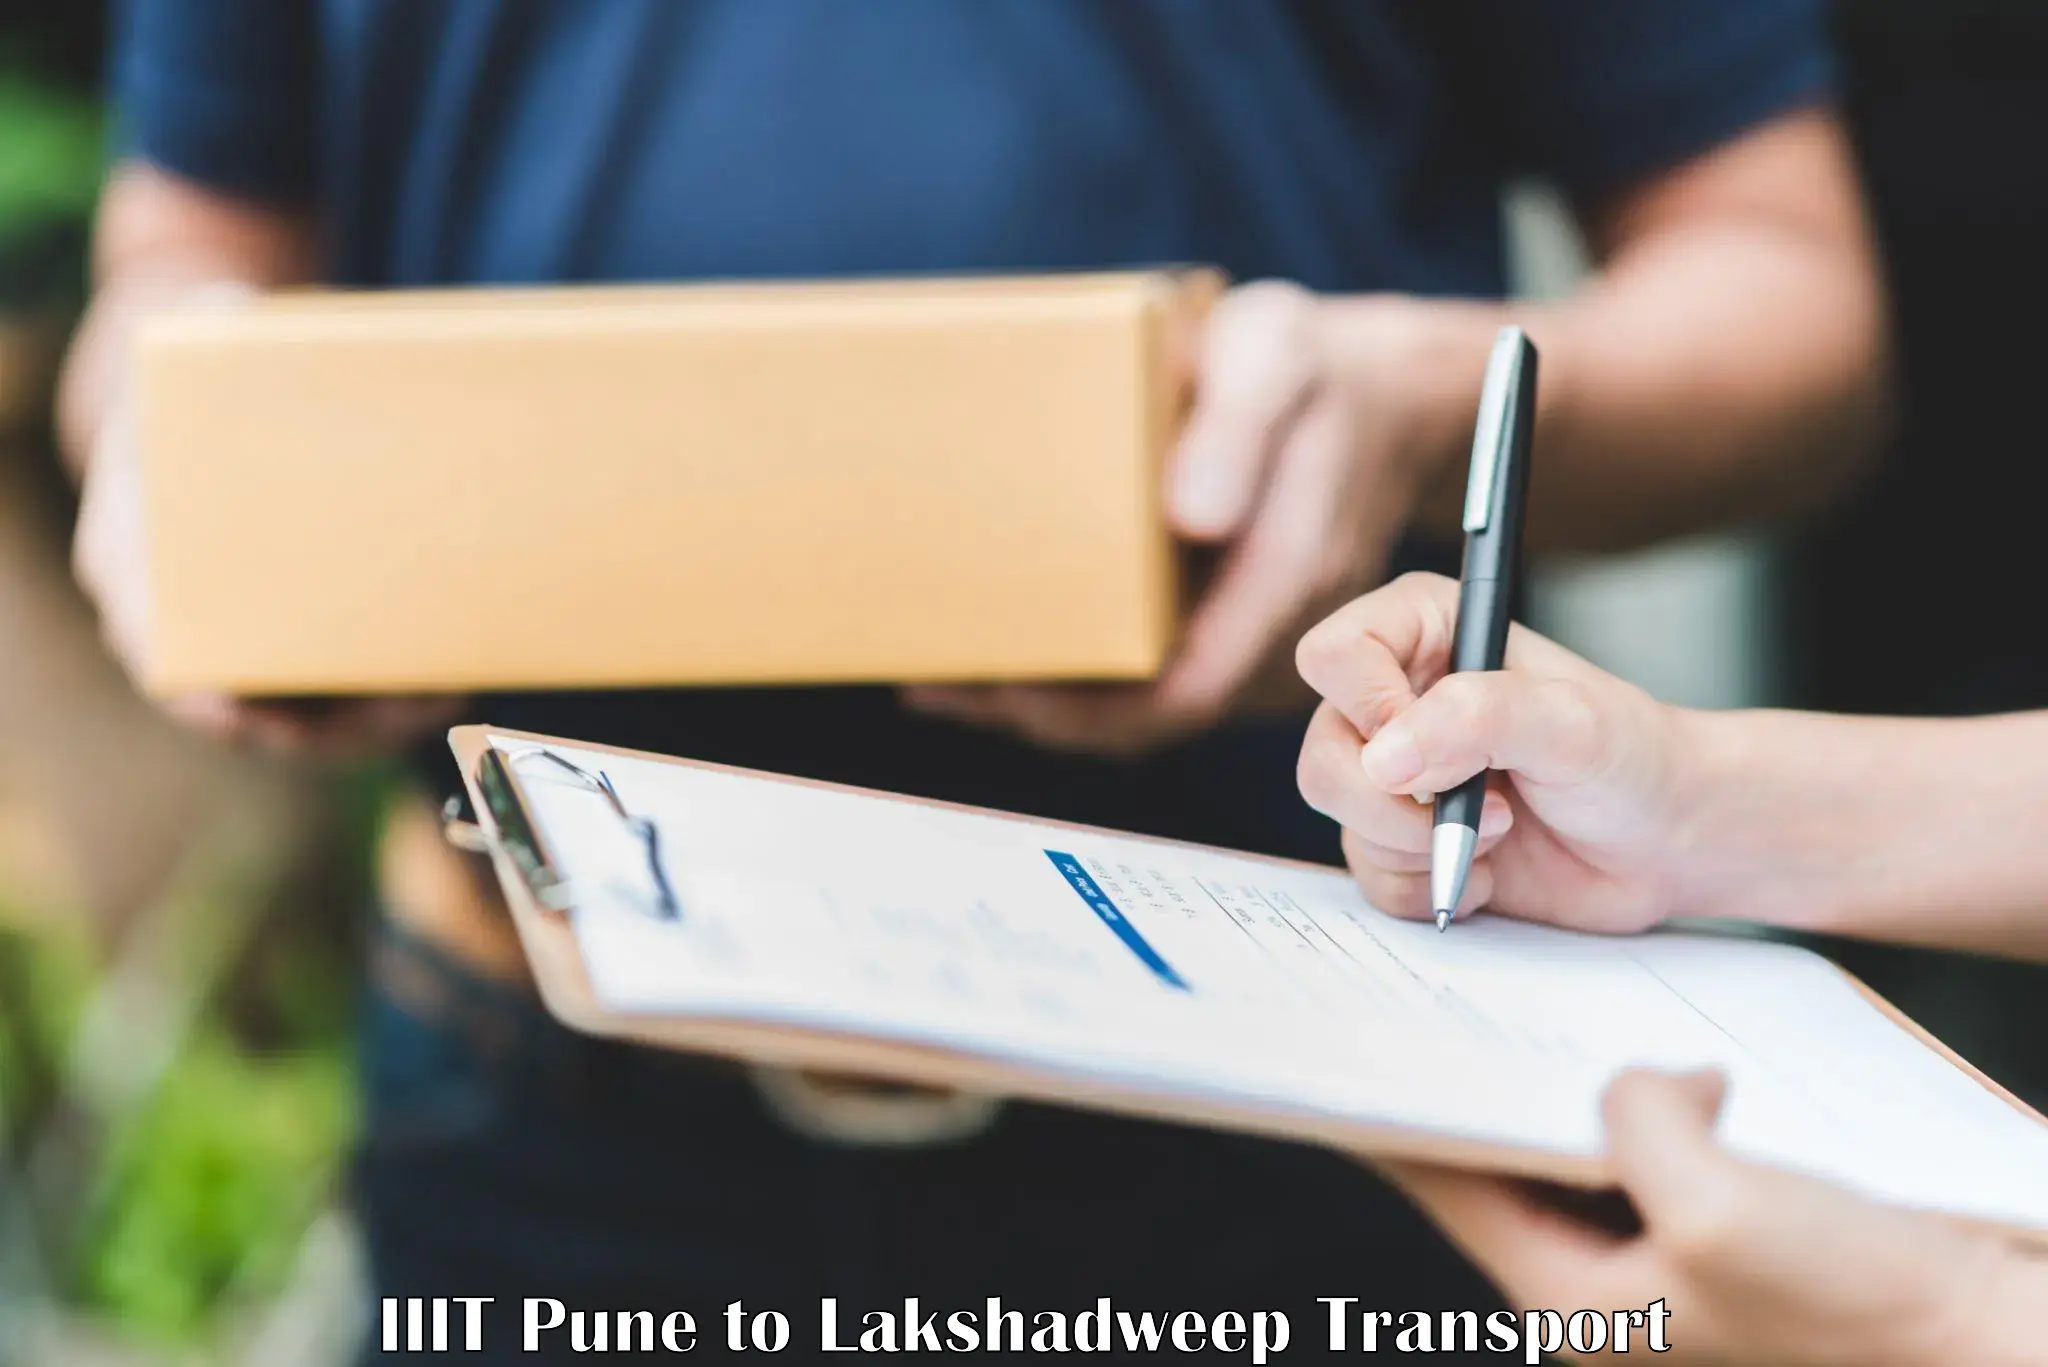 Goods delivery service IIIT Pune to Lakshadweep